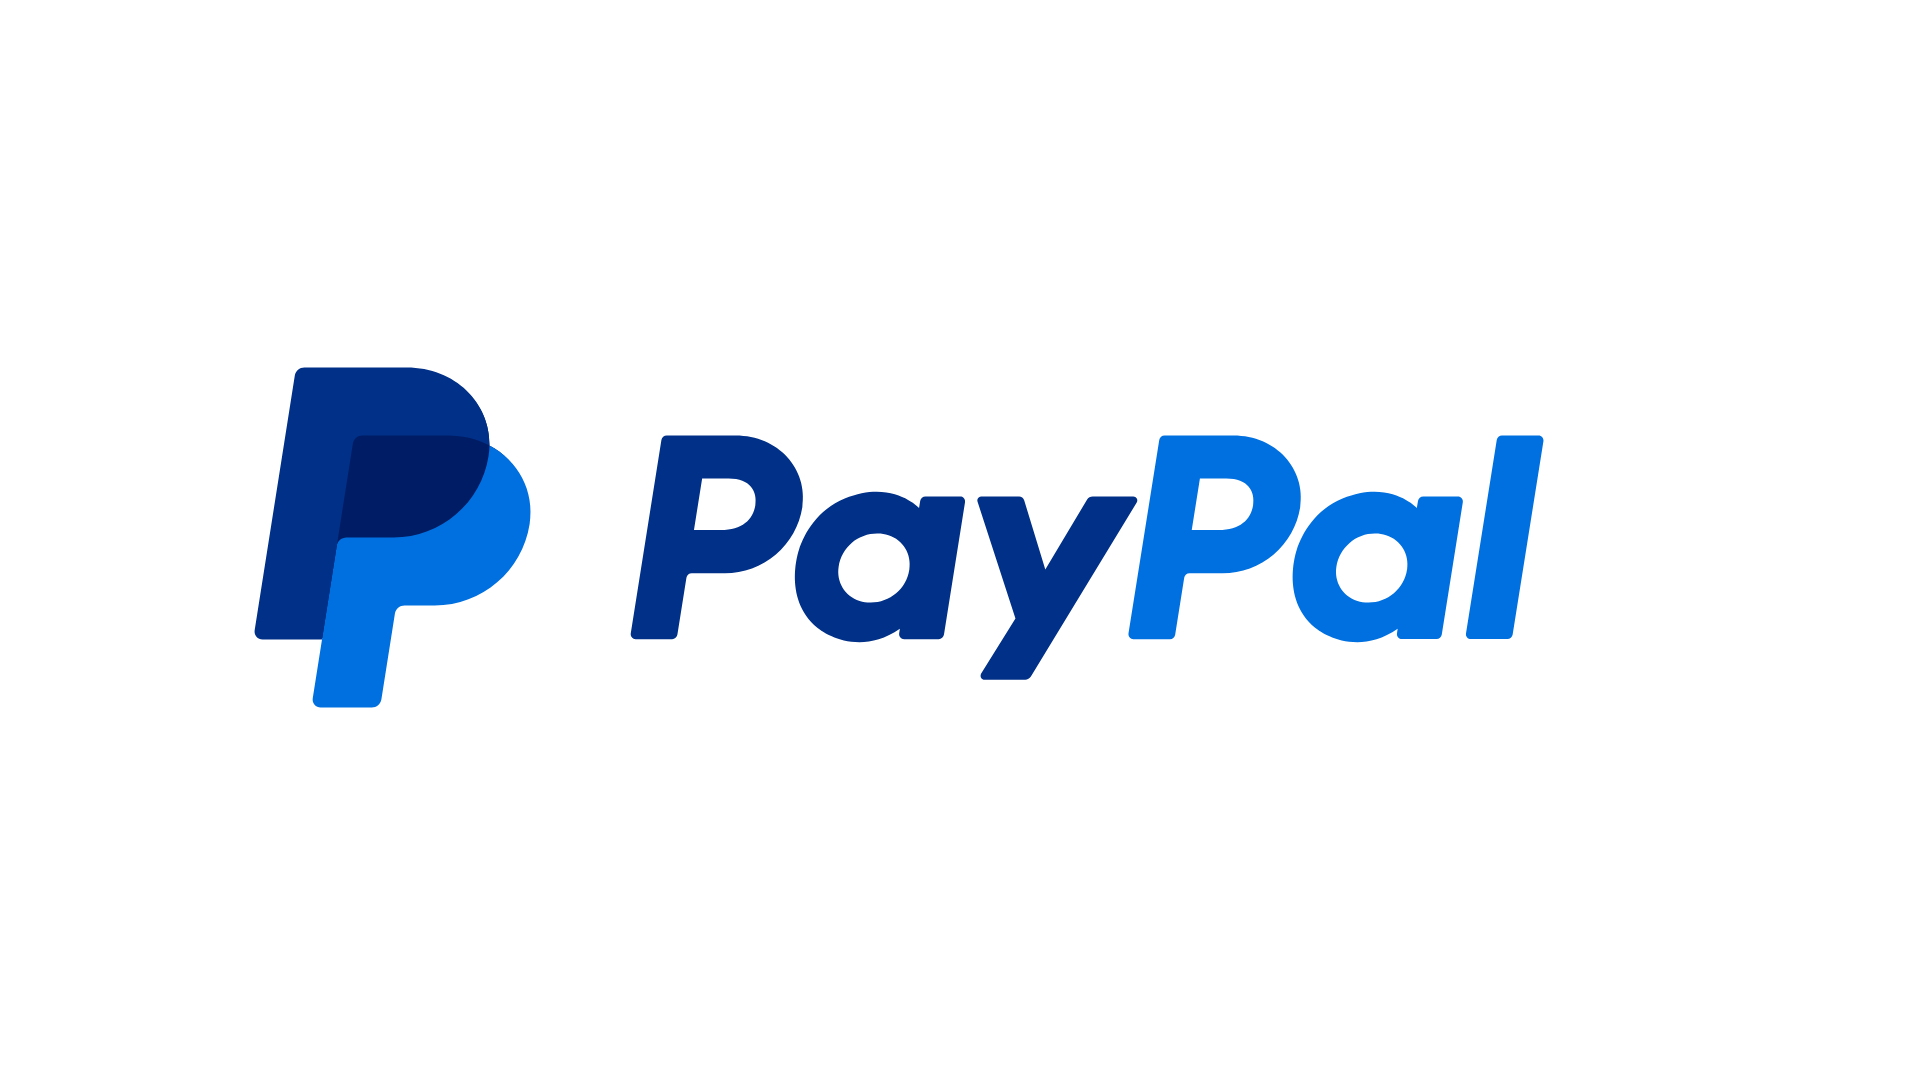 the paypal logo is blue and white on a white background .